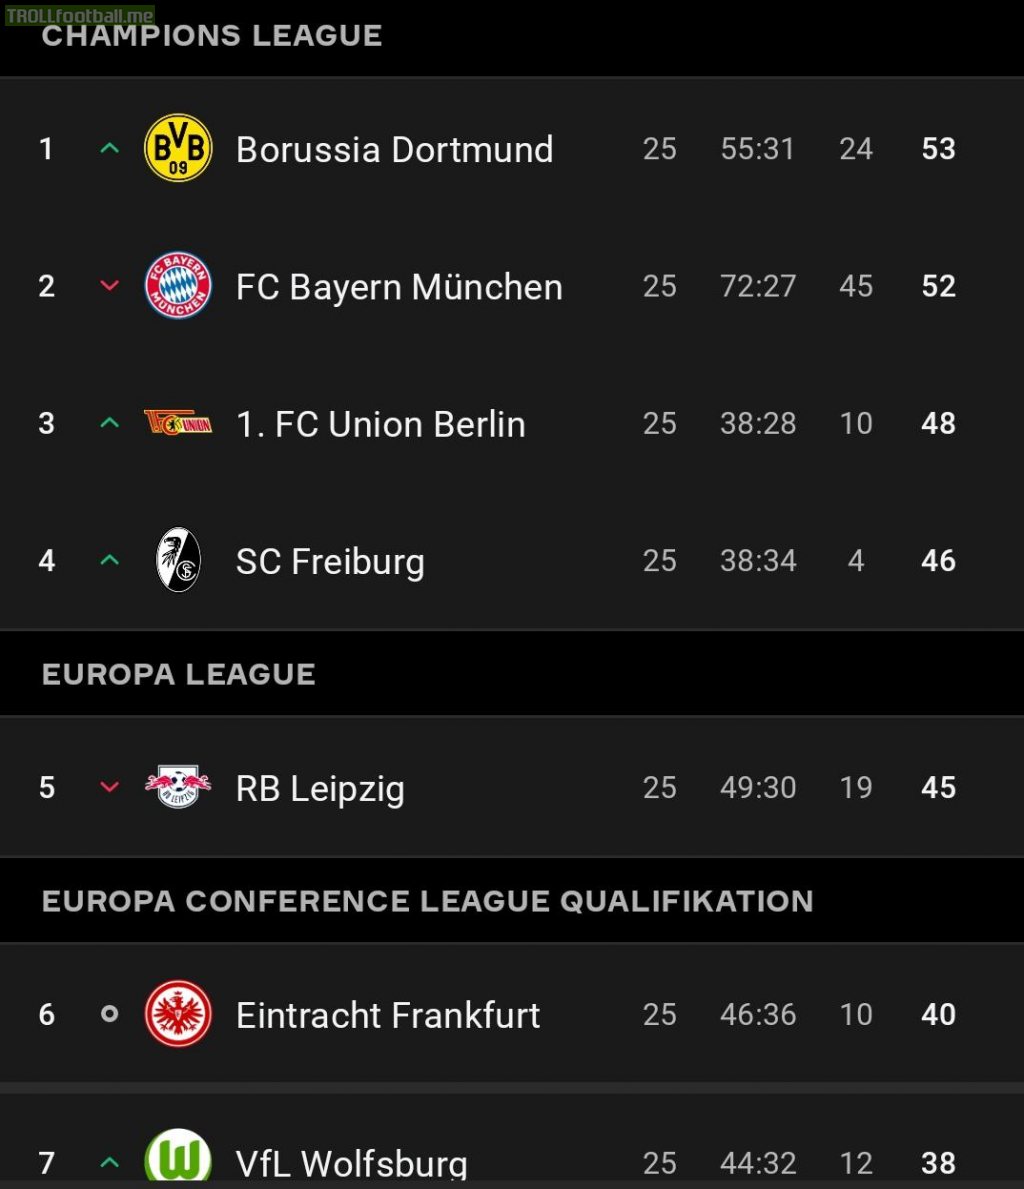 SC Freiburg are in 4th position in the Bundesliga table with a goal difference of only +4